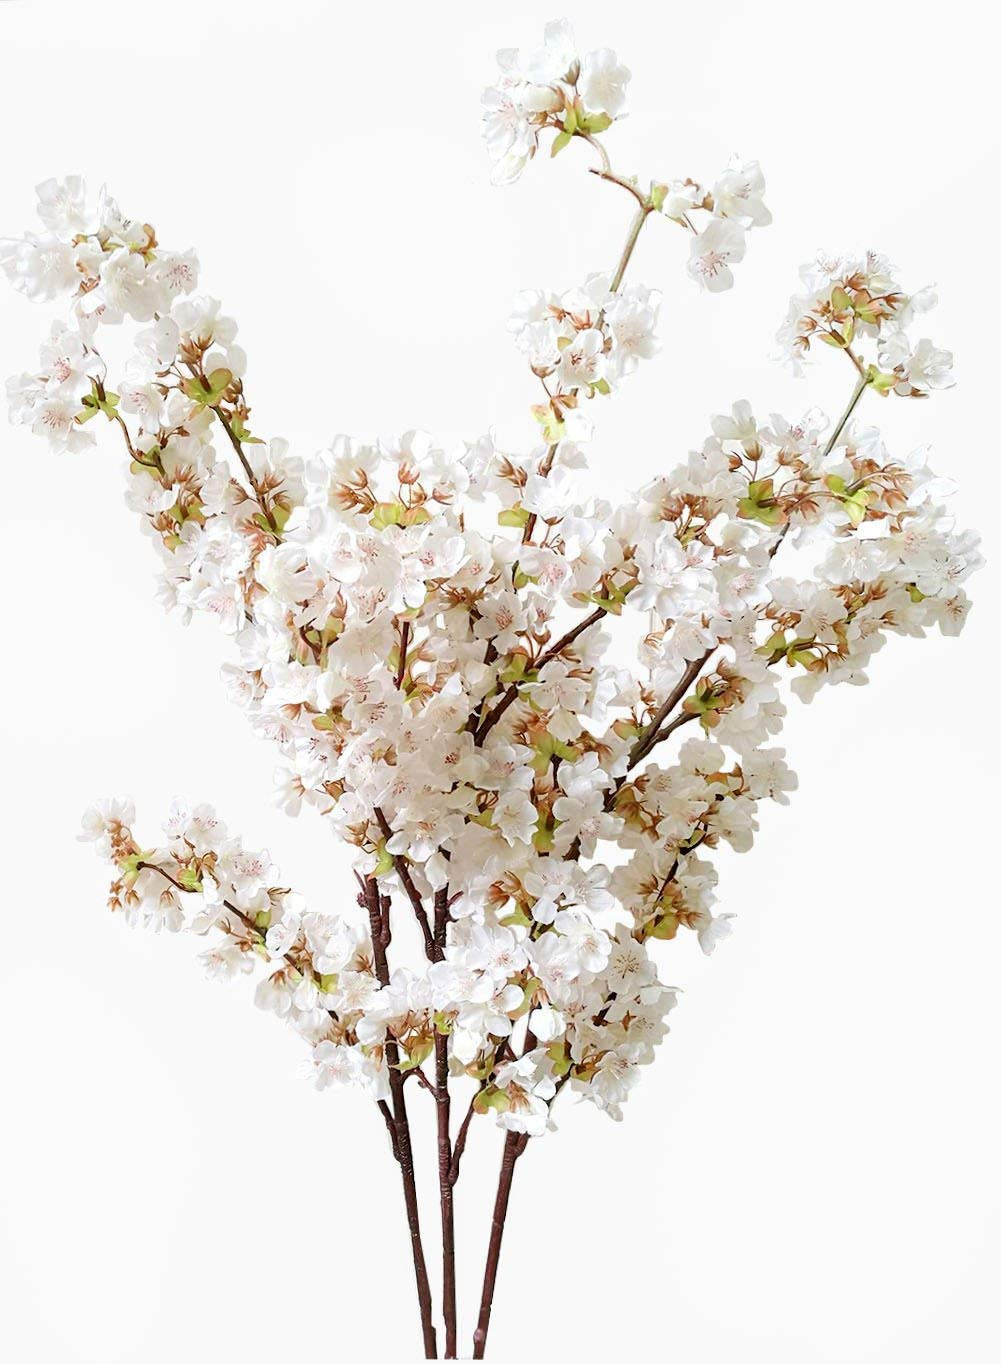 21 Stylish Light Up Branches for Vase 2024 free download light up branches for vase of amazon com ahvoler artificial cherry blossom branches flowers stems throughout amazon com ahvoler artificial cherry blossom branches flowers stems silk tall fak